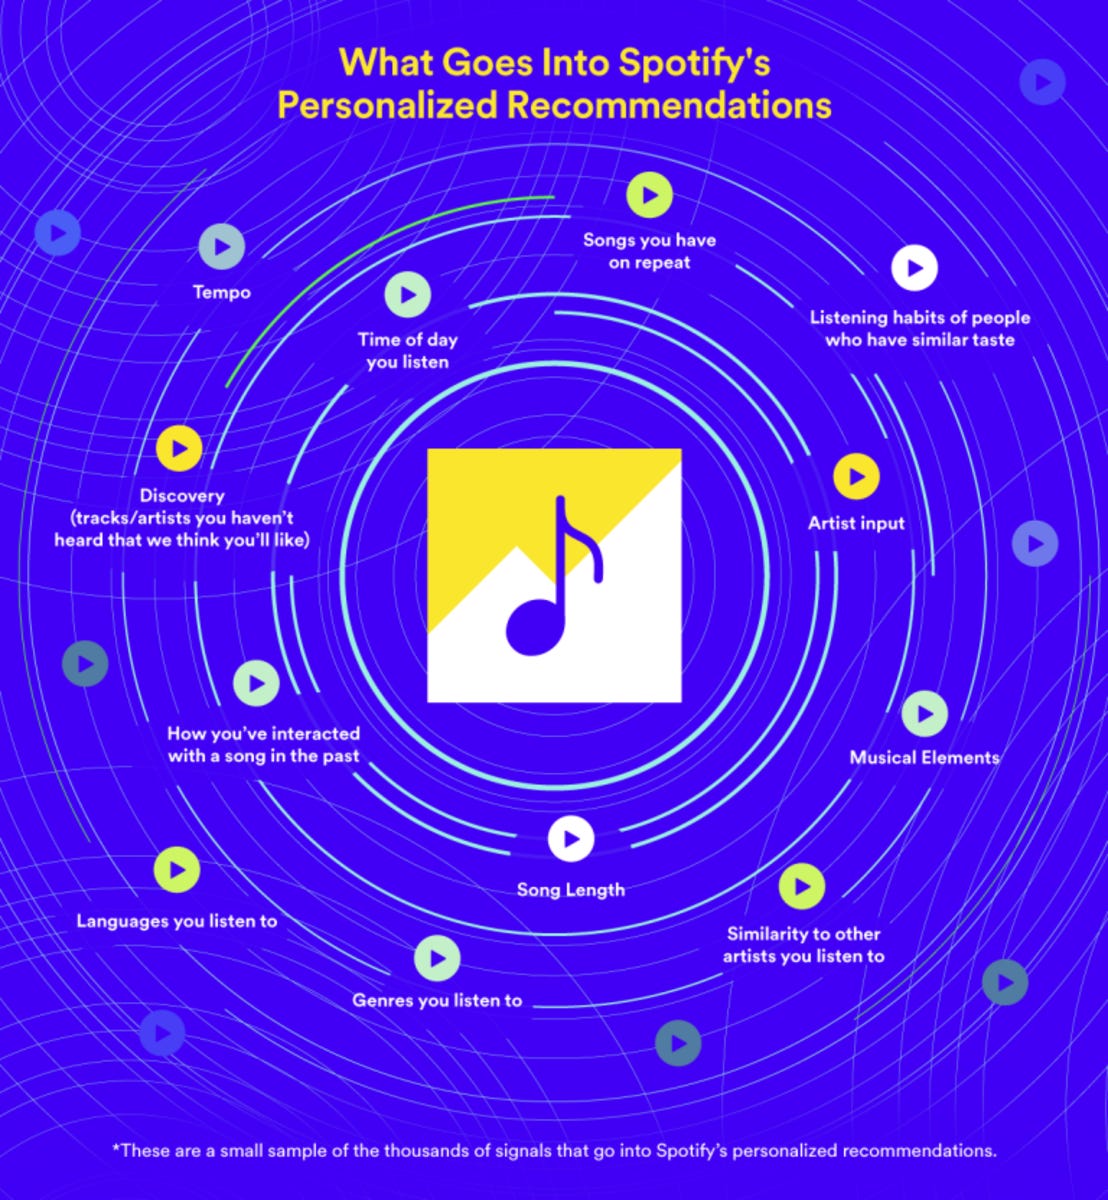 Infographic depicting what goes into Spotify's personalized recommendations.